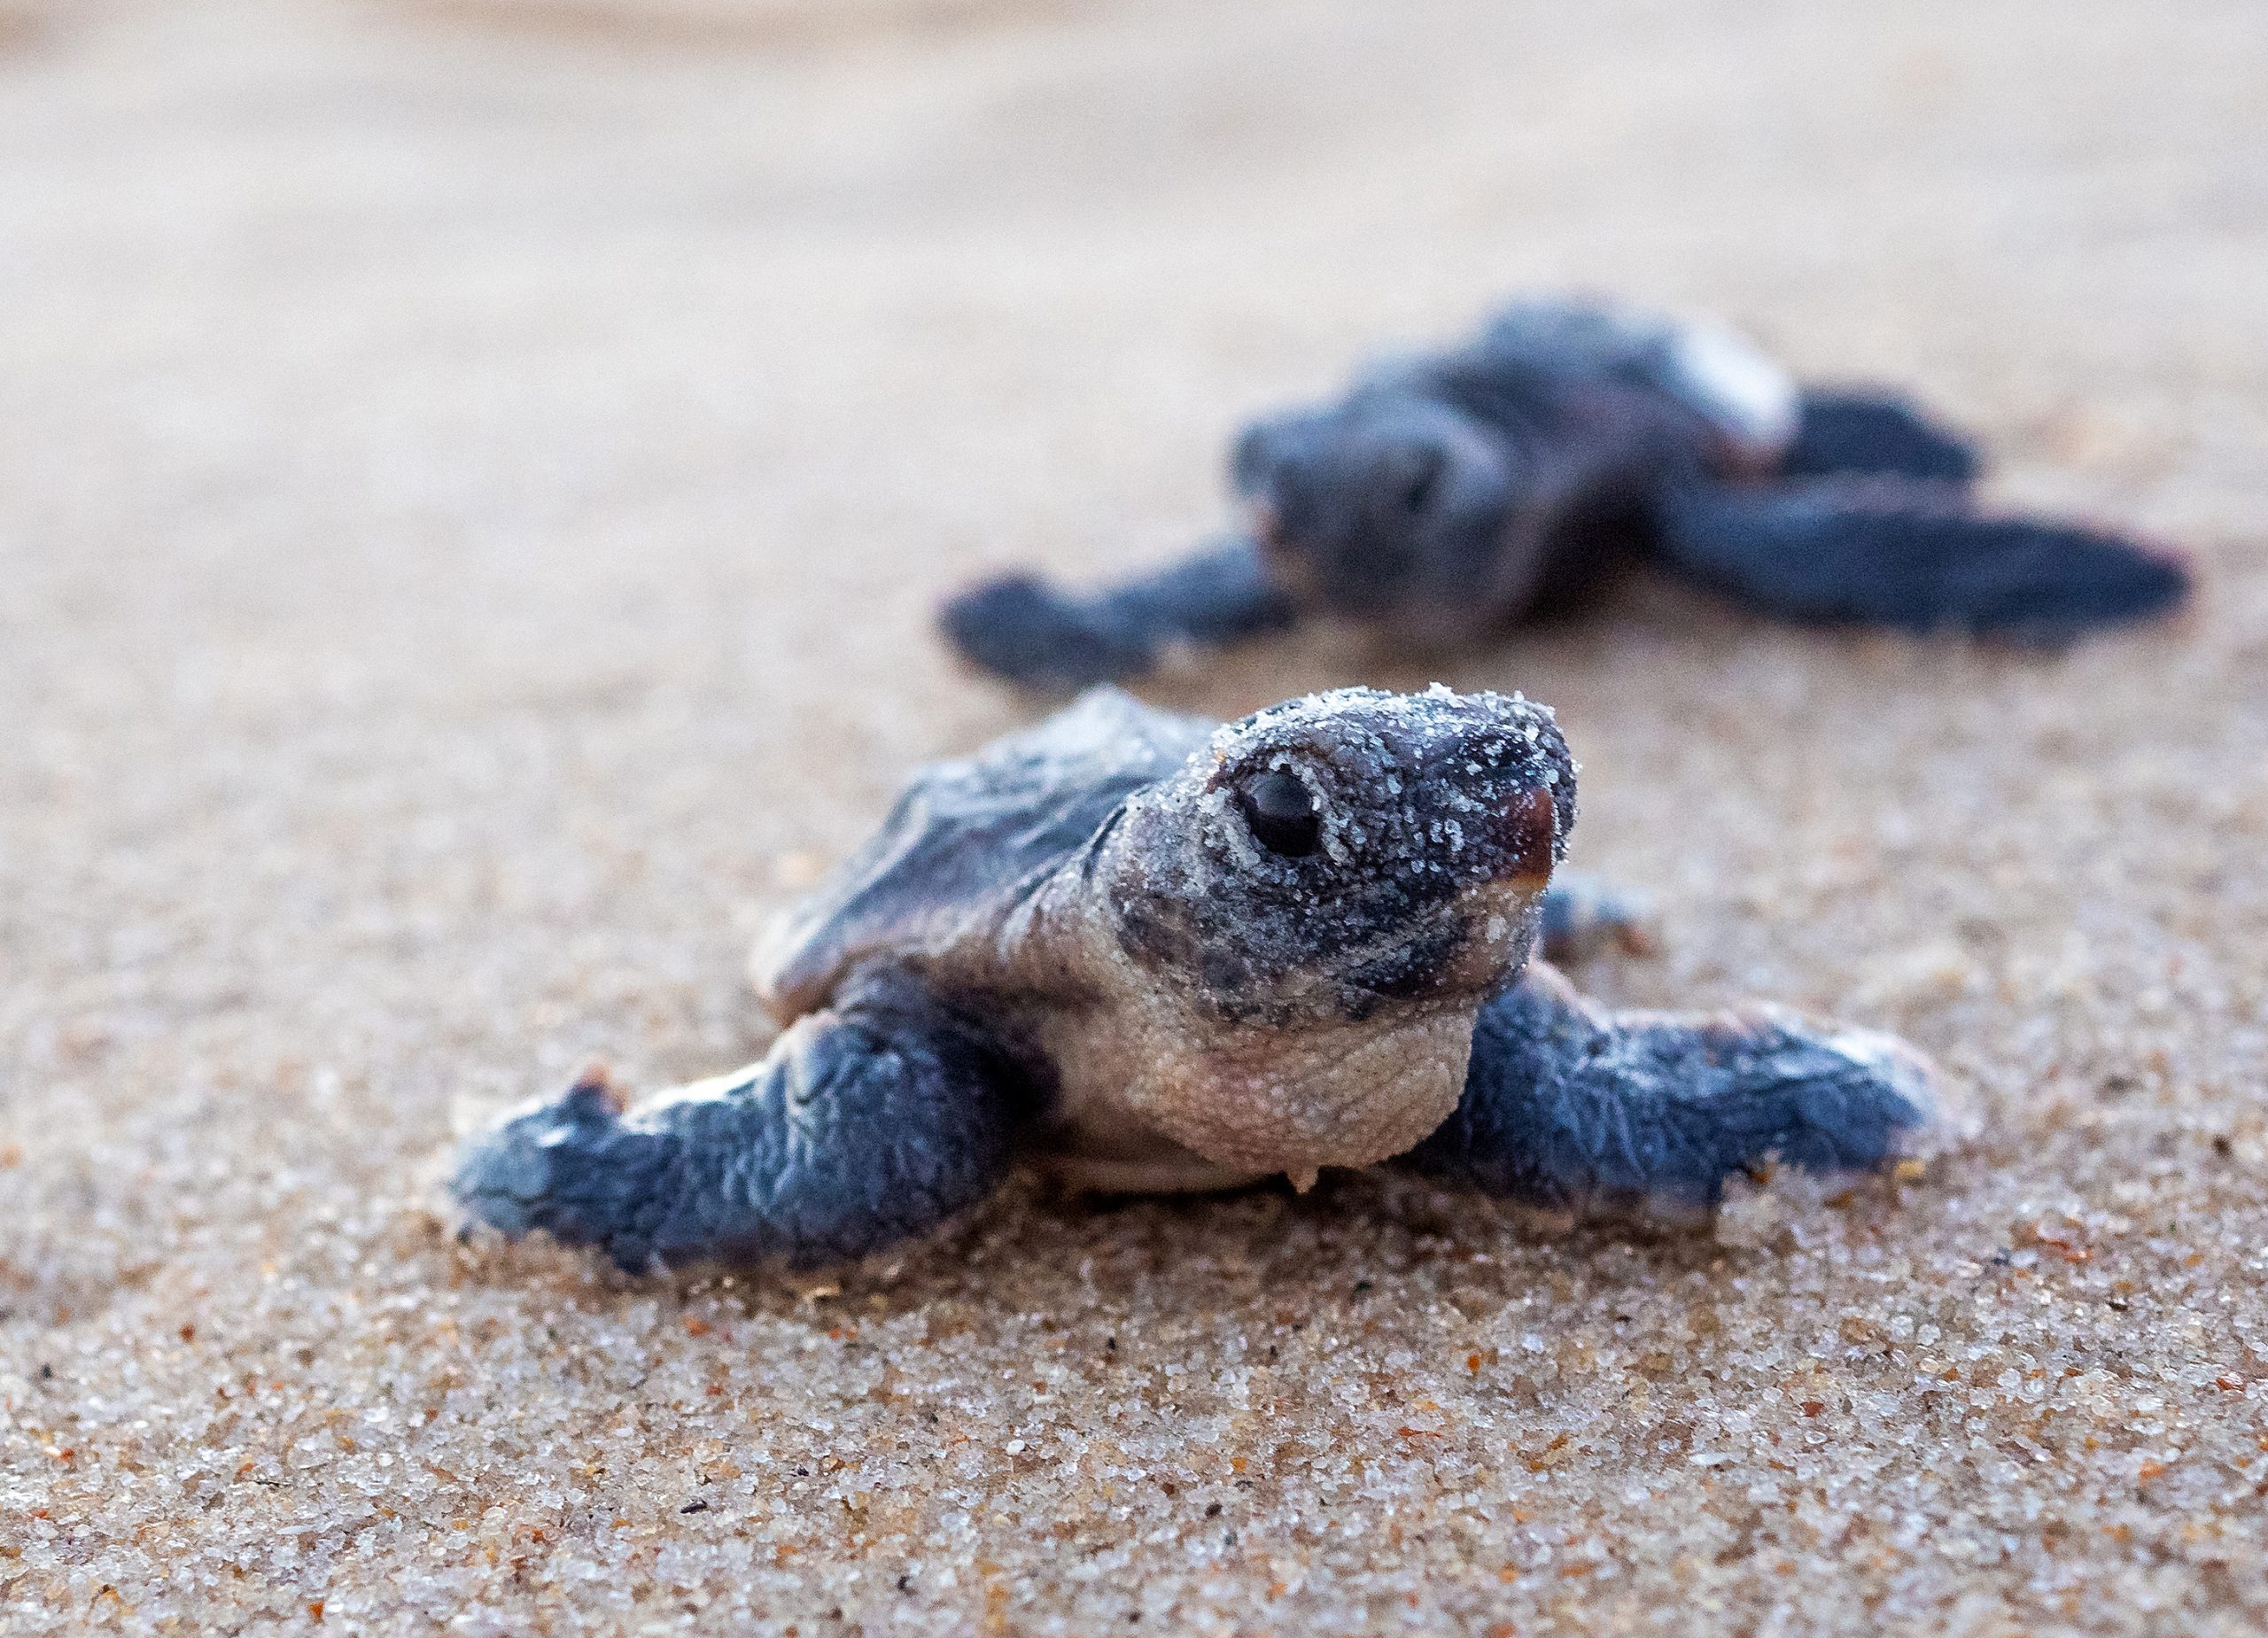 Share the Beach's training for sea turtle monitoring coming up